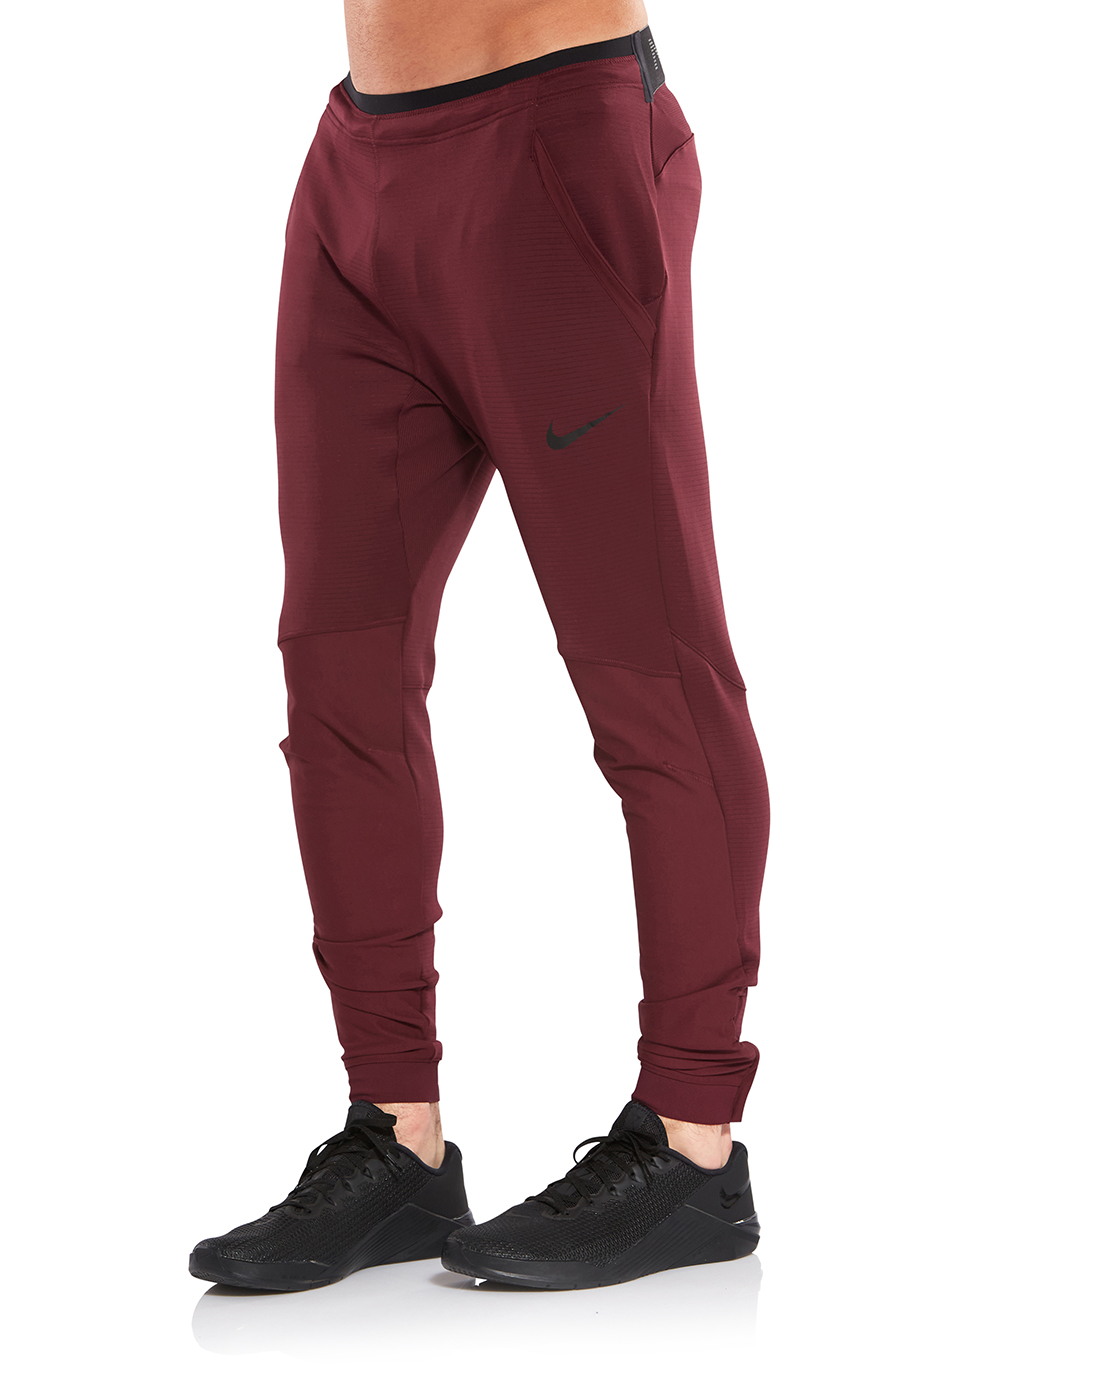 Nike Mens Pro Training Pants - Red | Life Style Sports IE